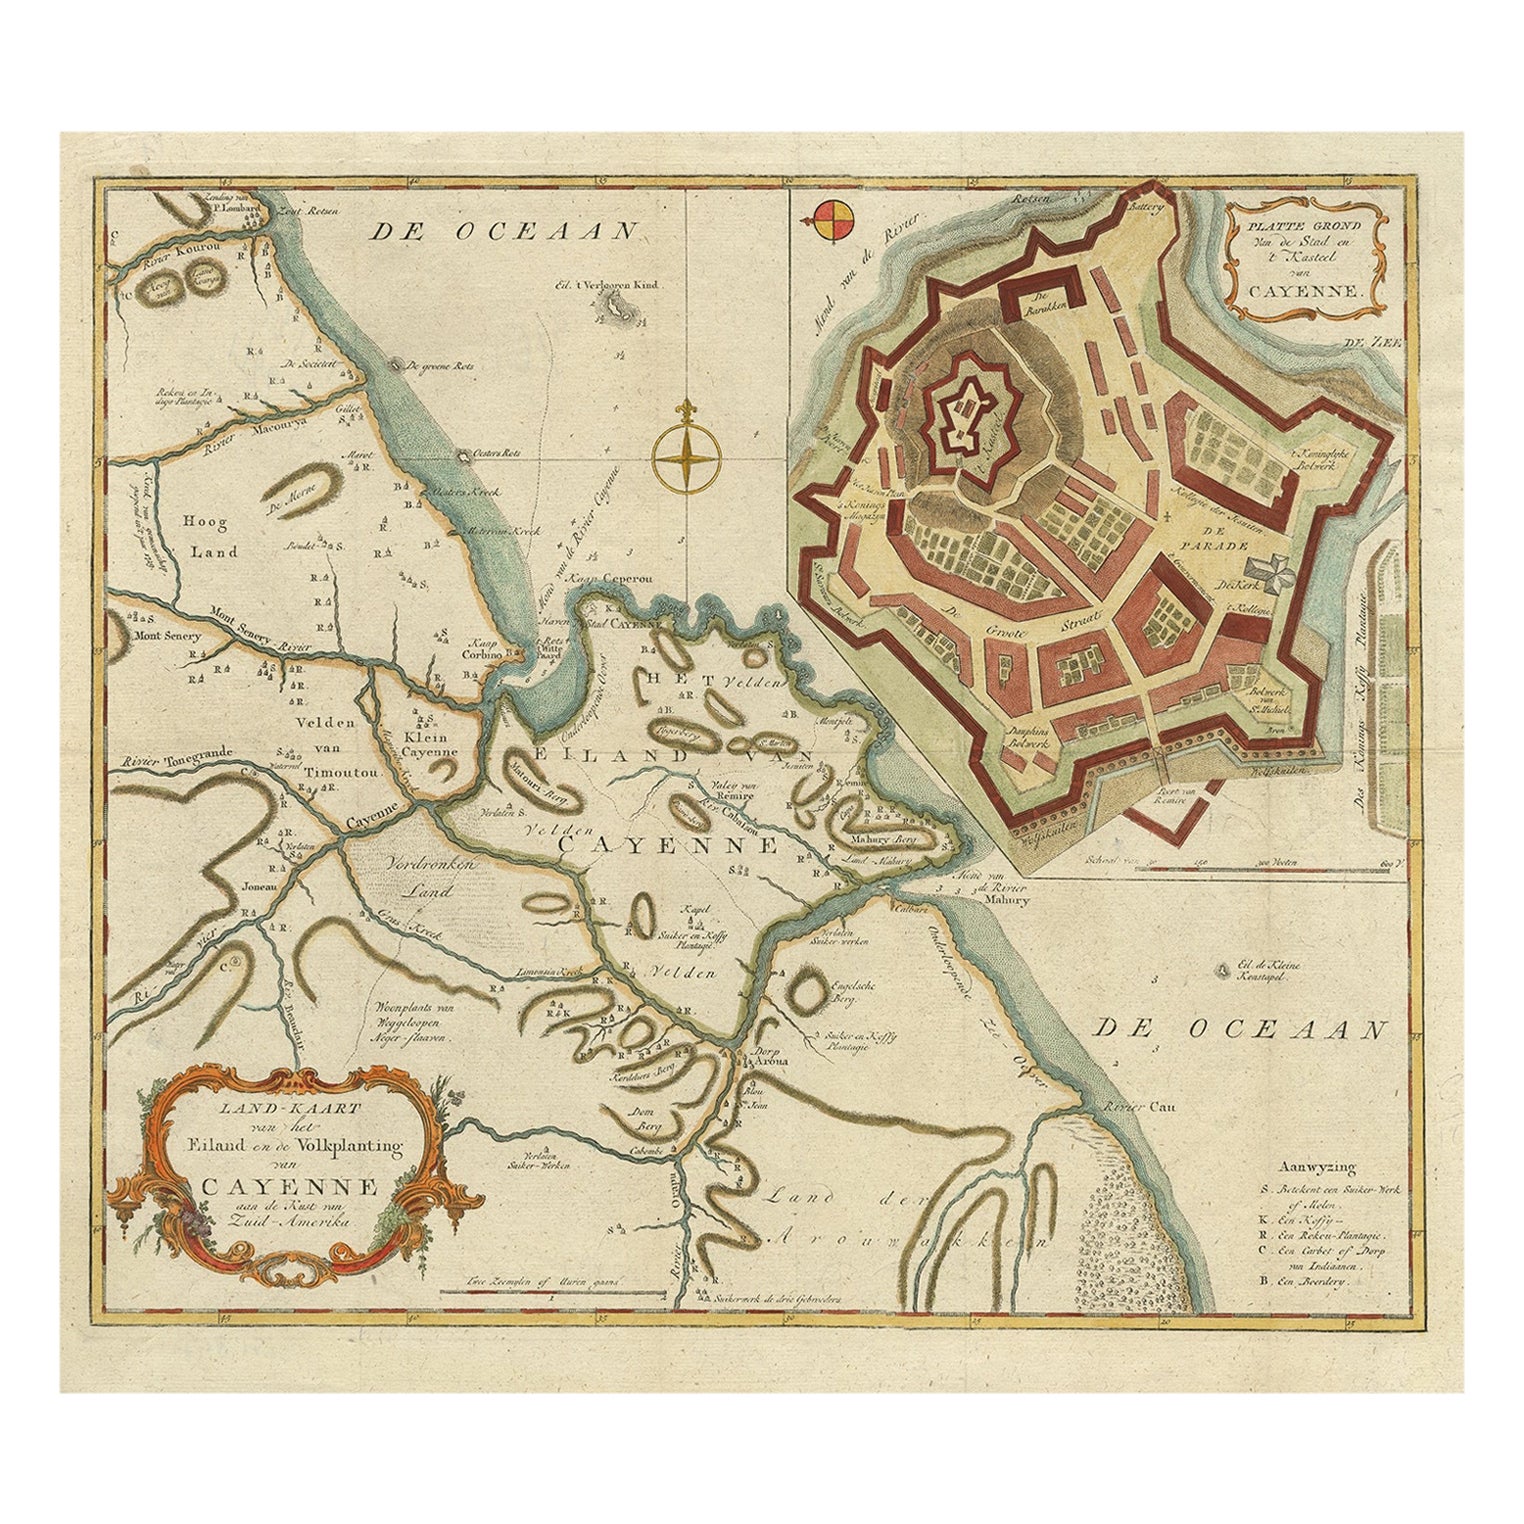 Striking Antique Map of Cayenne in French Guyana, South America, ca.1760